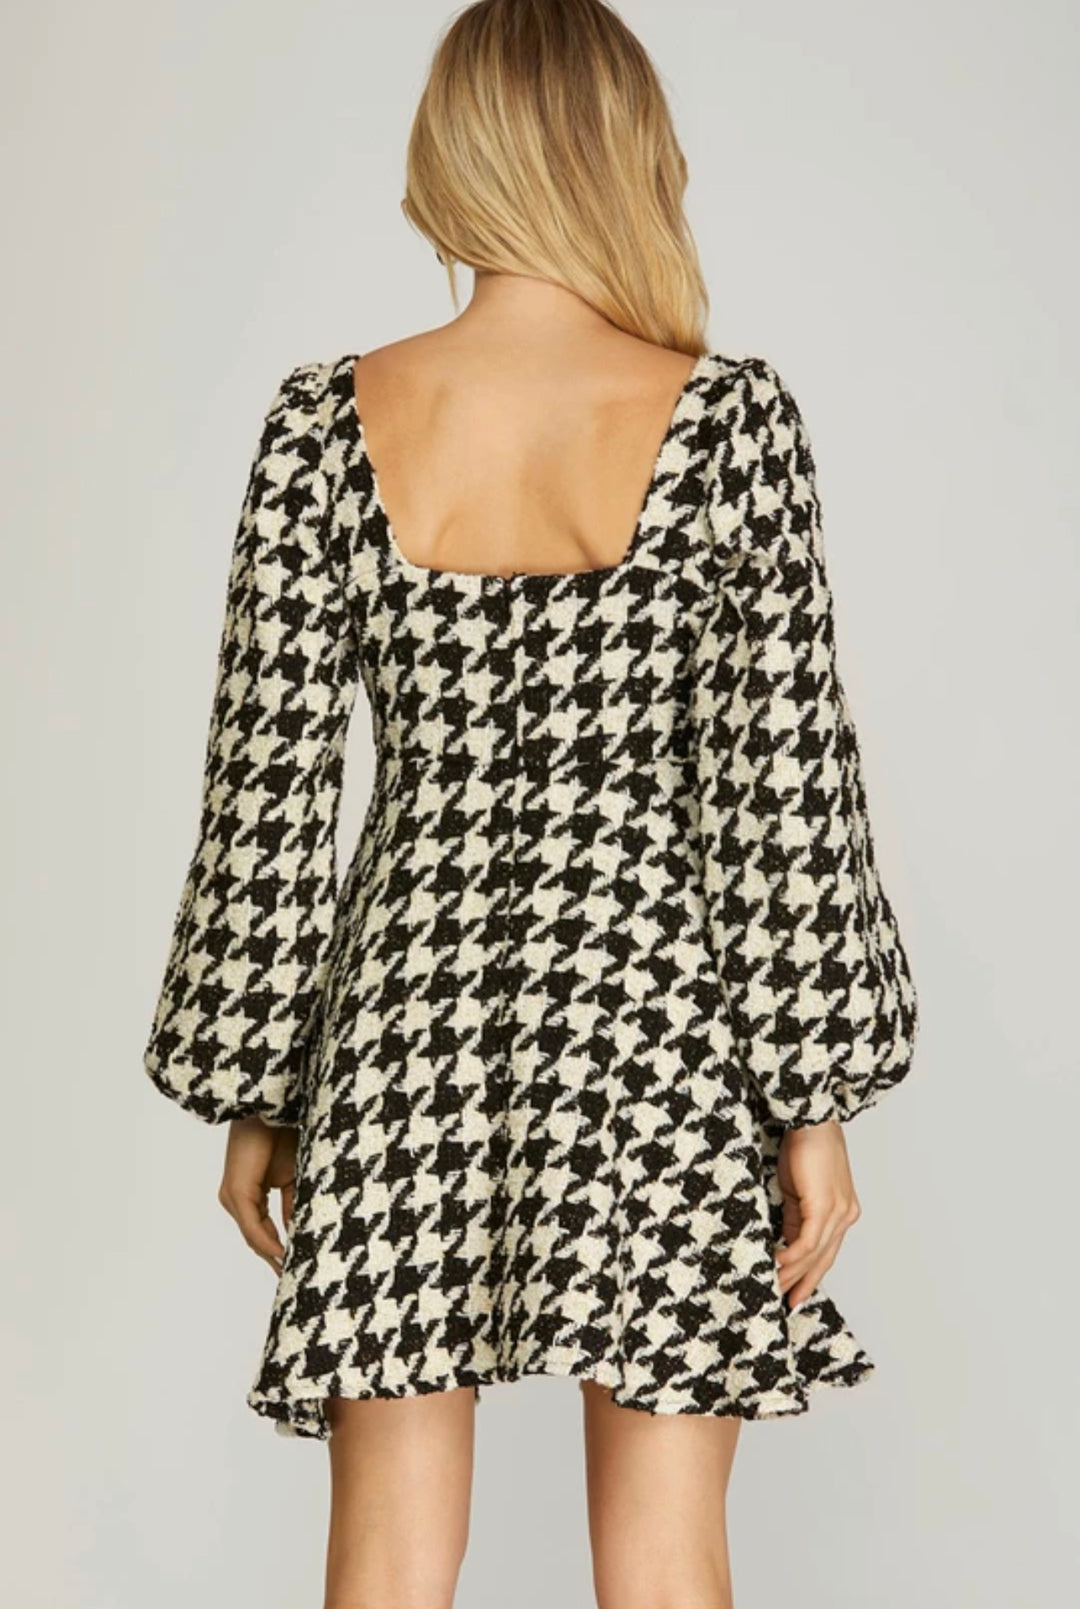 Amelia Tweed Houndstooth Print Dress-Dresses-Inspired by Justeen-Women's Clothing Boutique in Chicago, Illinois